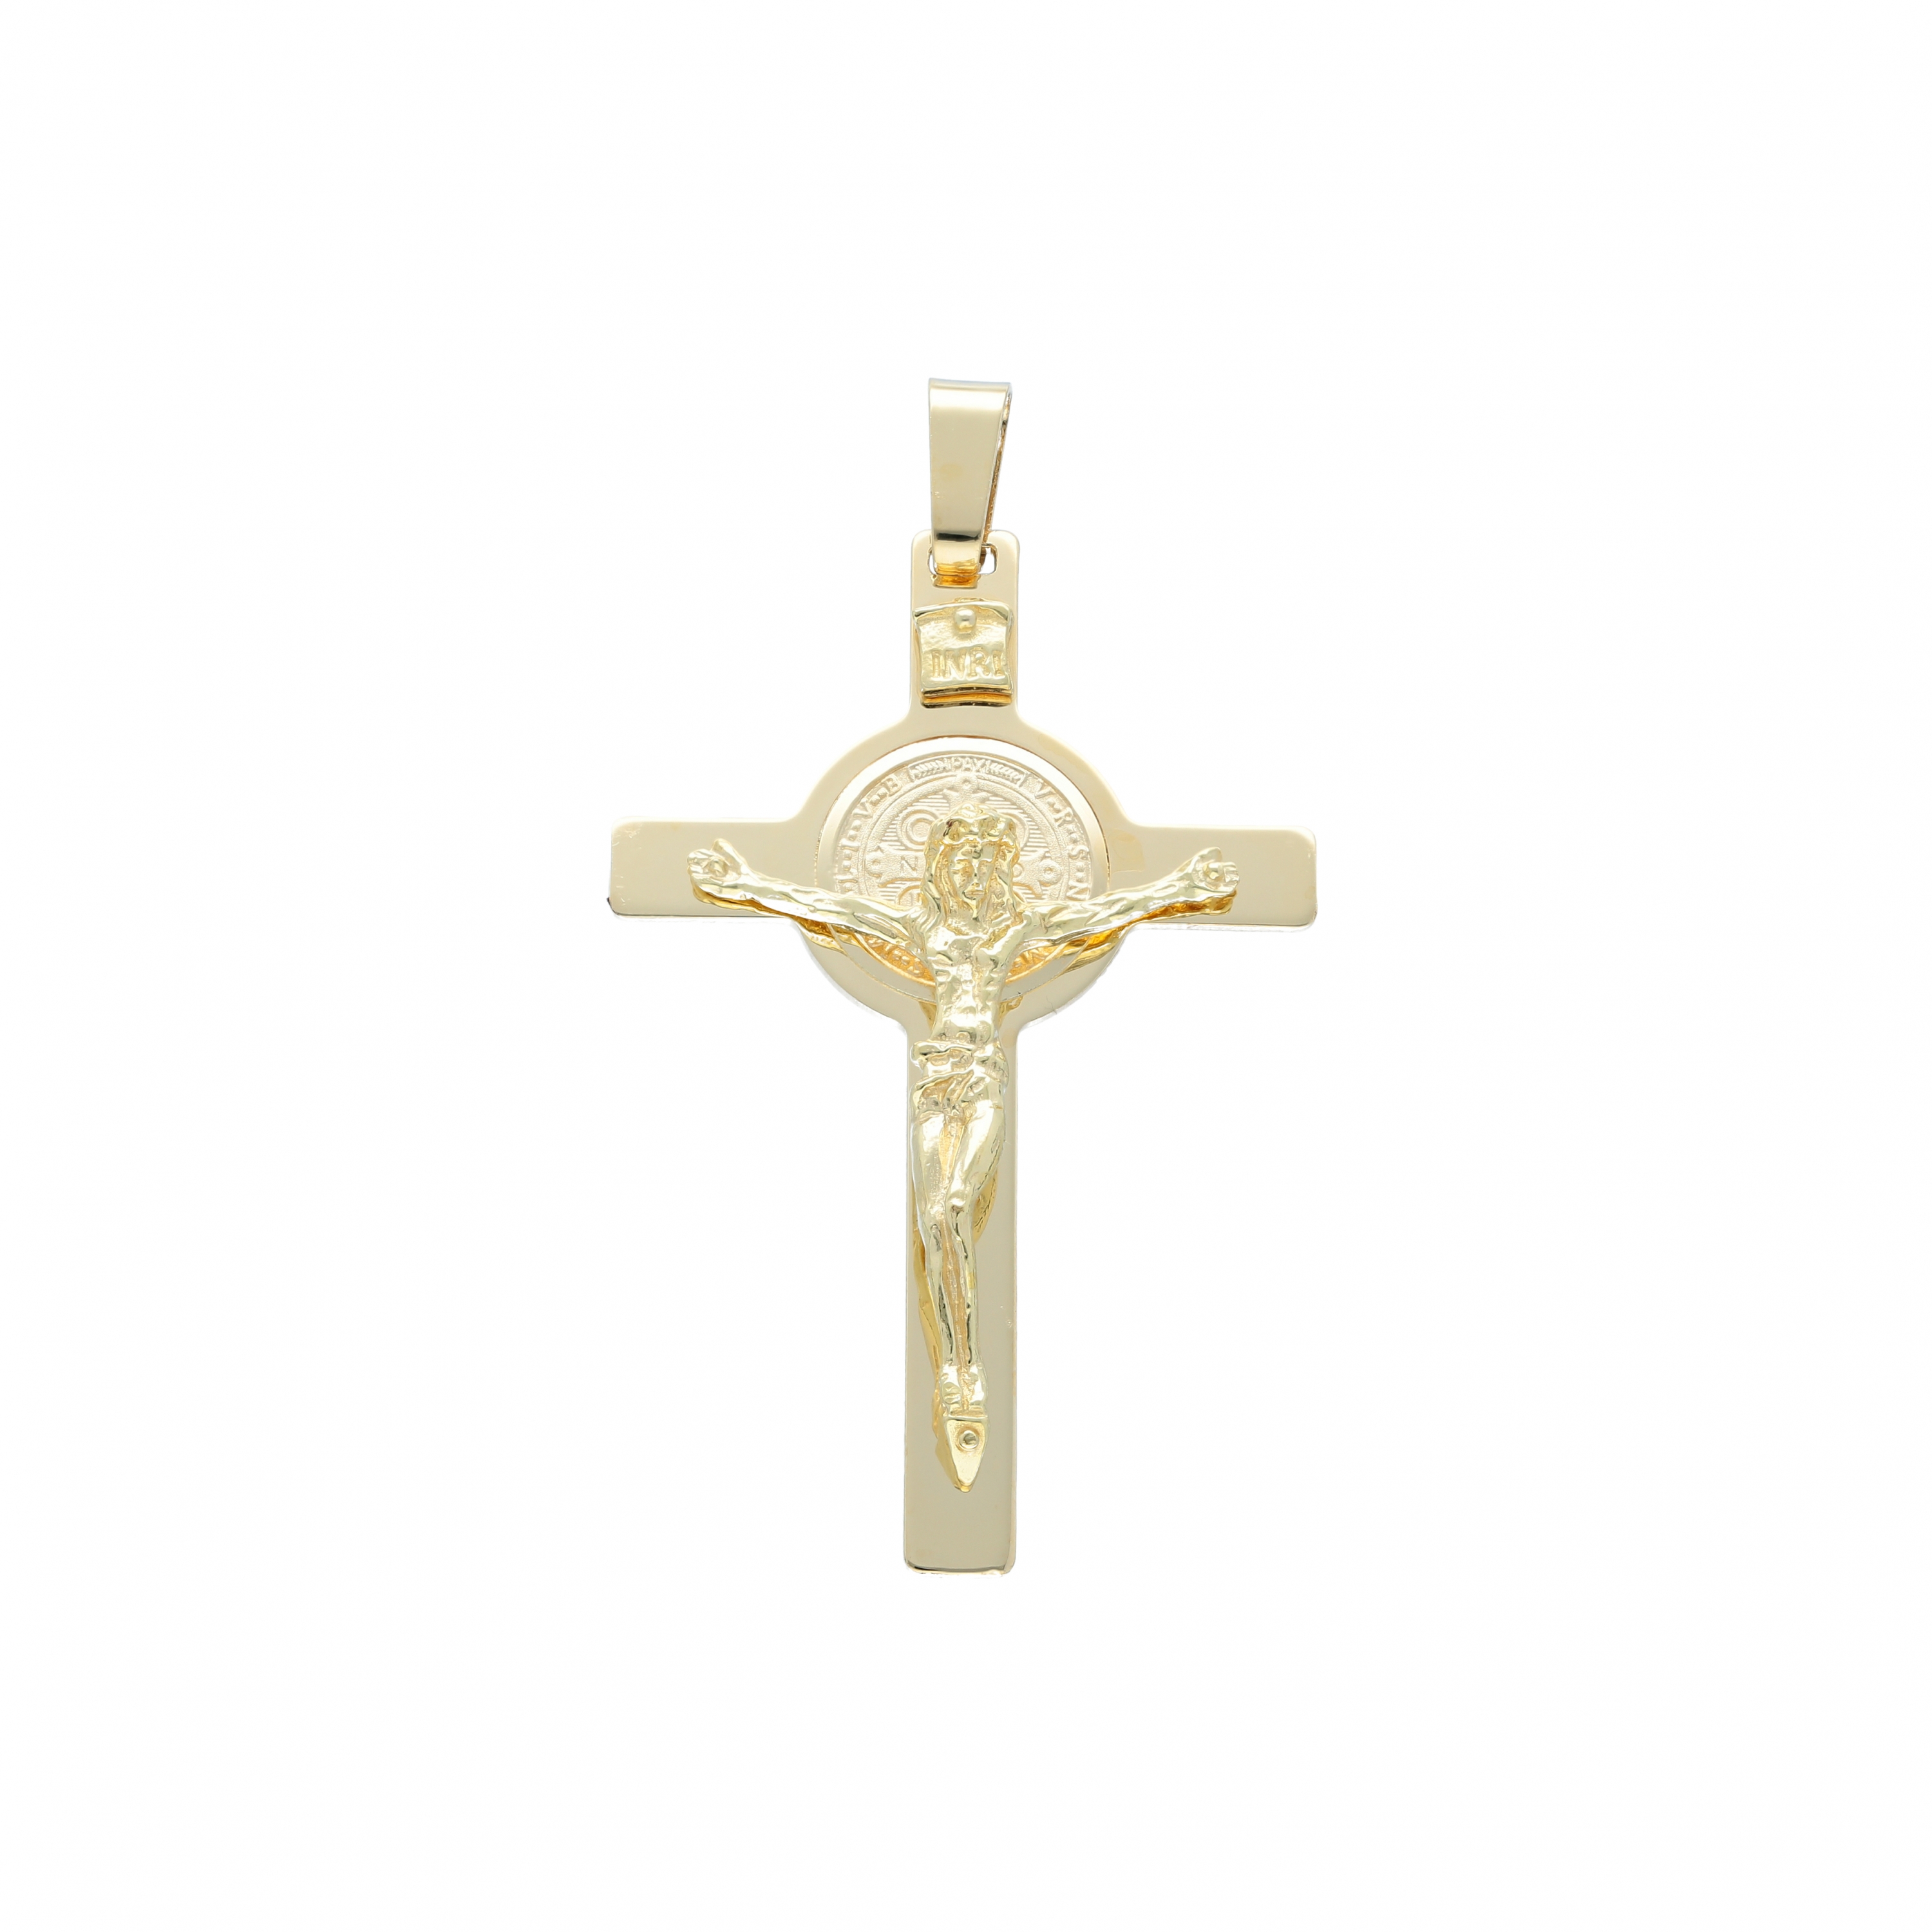 18K WHITE GOLD CROSS VERY SHINY WITH JESUS CHRIST MADE IN ITALY 1.57 INCHES 